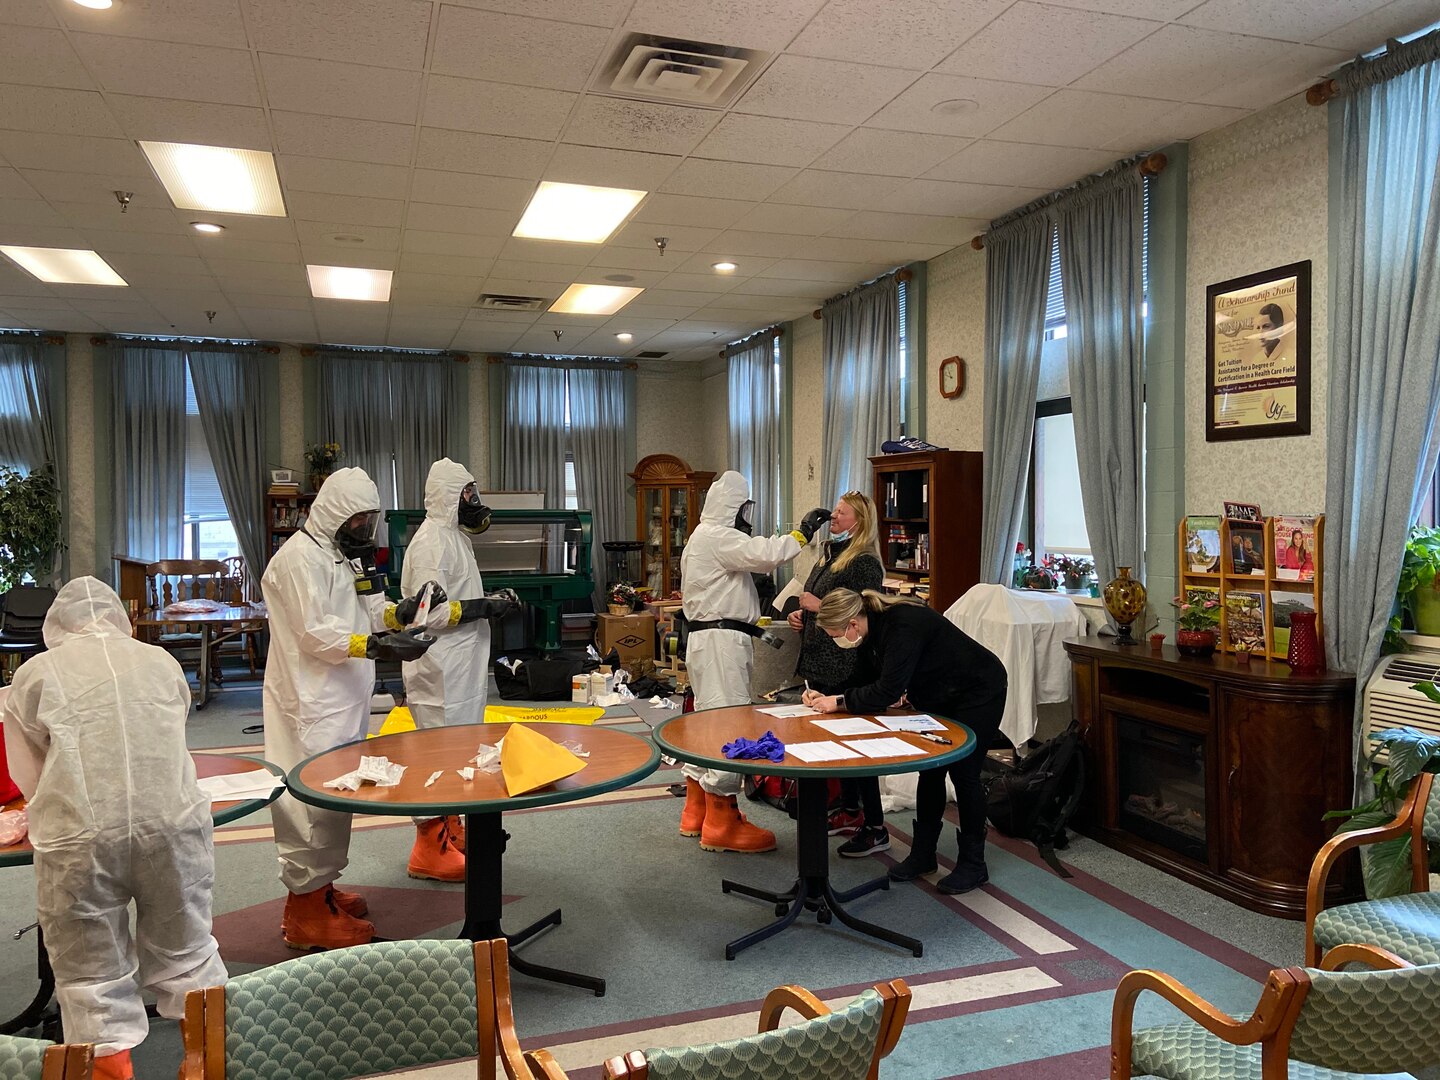 Members of the West Virginia National Guard's Chemical, Biological, Radiological, Nuclear and High Yield Explosive (CBRNE) Battalion and 35th Civil Support Team (CST) help test the staff of a nursing facility March 23, 2020, in Morgantown, West Virginia.